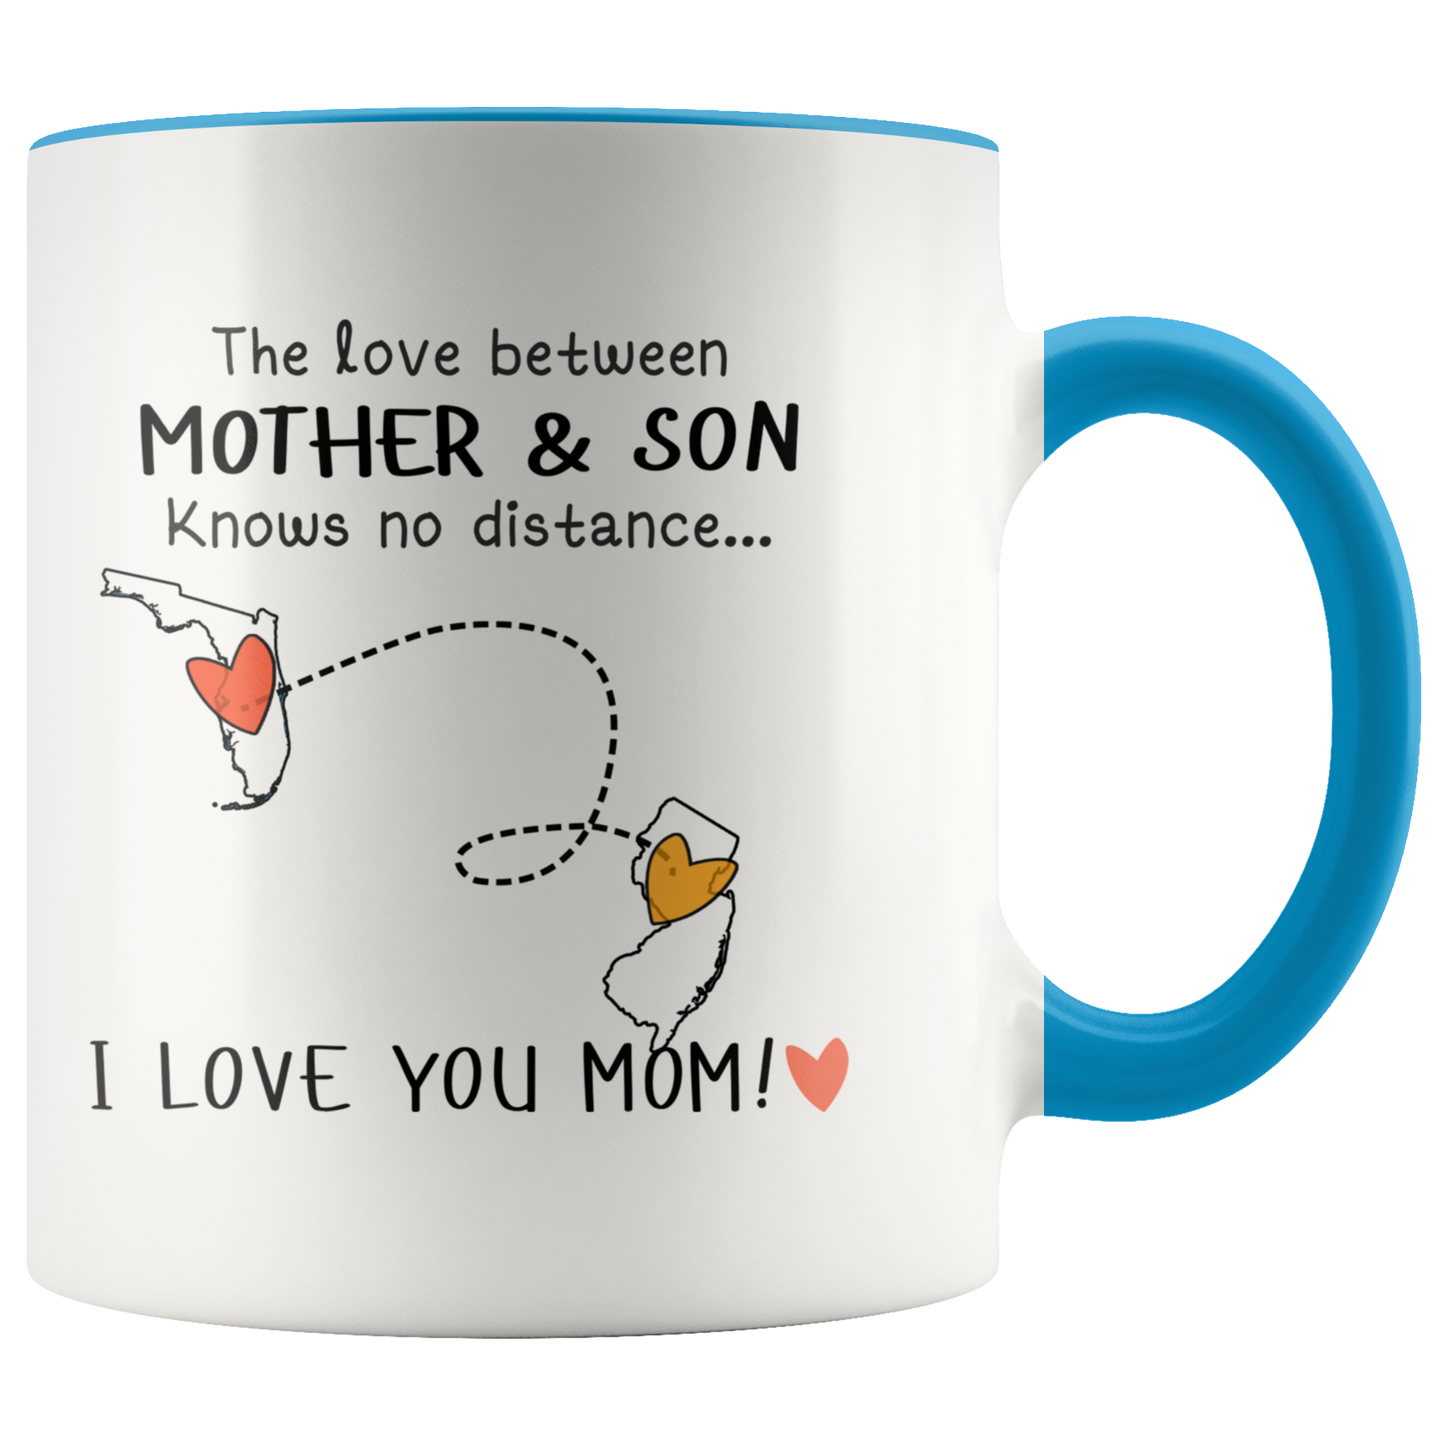 MUG01221340623-sp-23015 - The Love Between Mother And Son Knows No Distance, I Love Yo